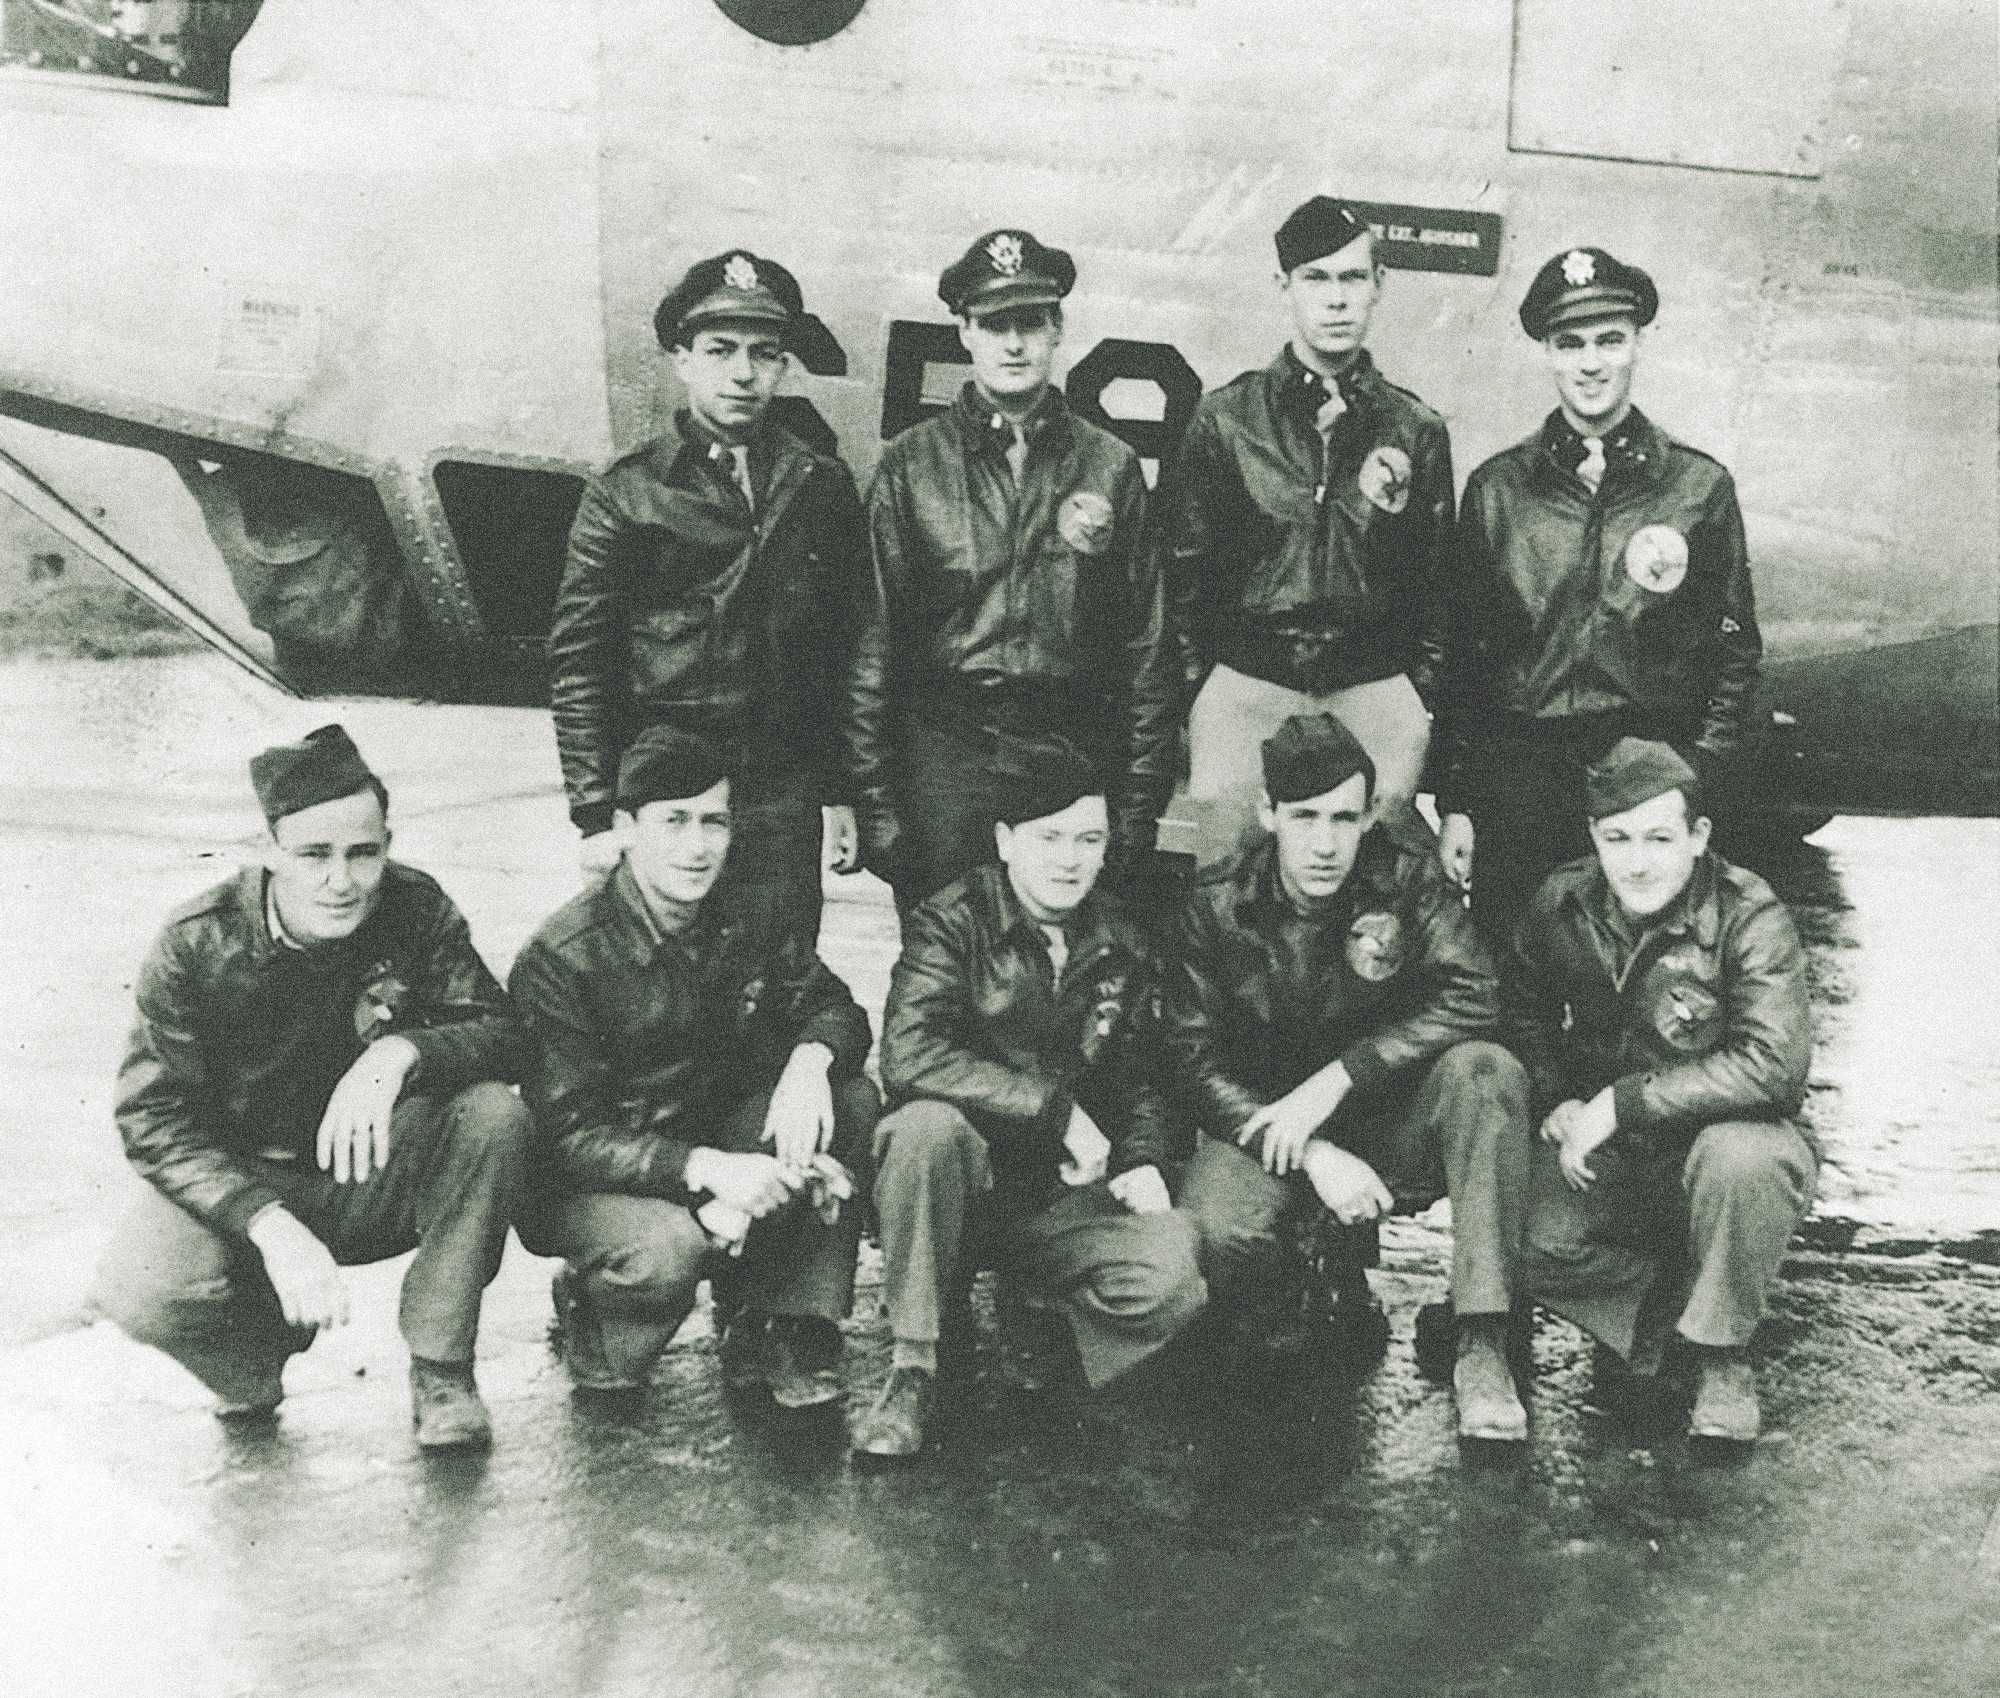 Lieutenants William R. Sincock (back row, second from left) and Theodore Q. Balides (back row, far left) and their fellow B-24H Liberator crewmen. (National Archives)